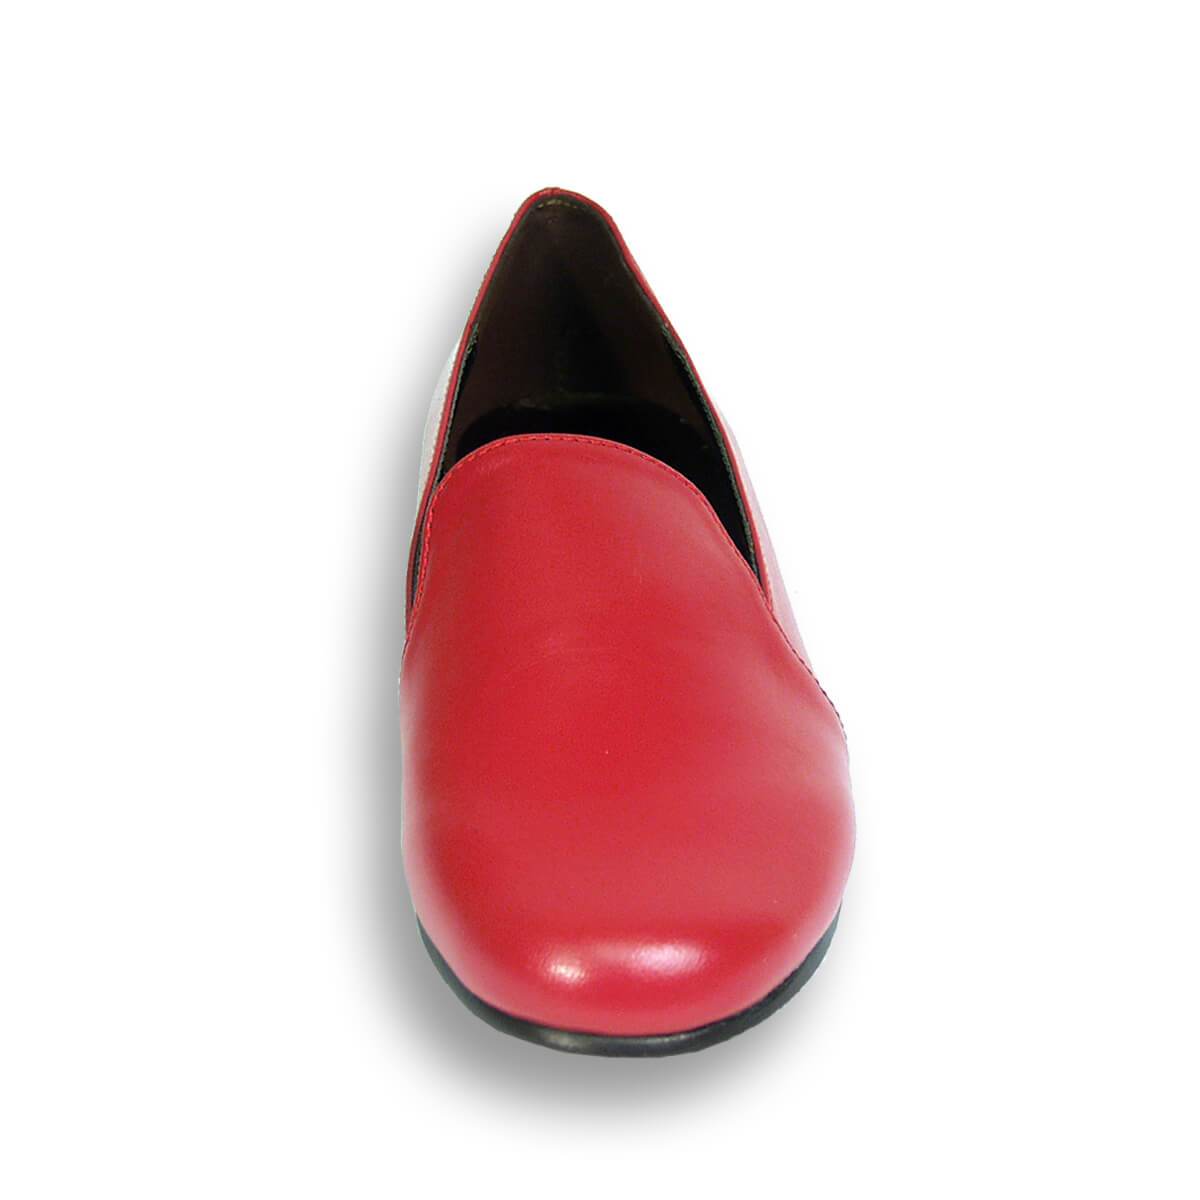 PEERAGE Charlie Women's Wide Width Leather Flat Shoes